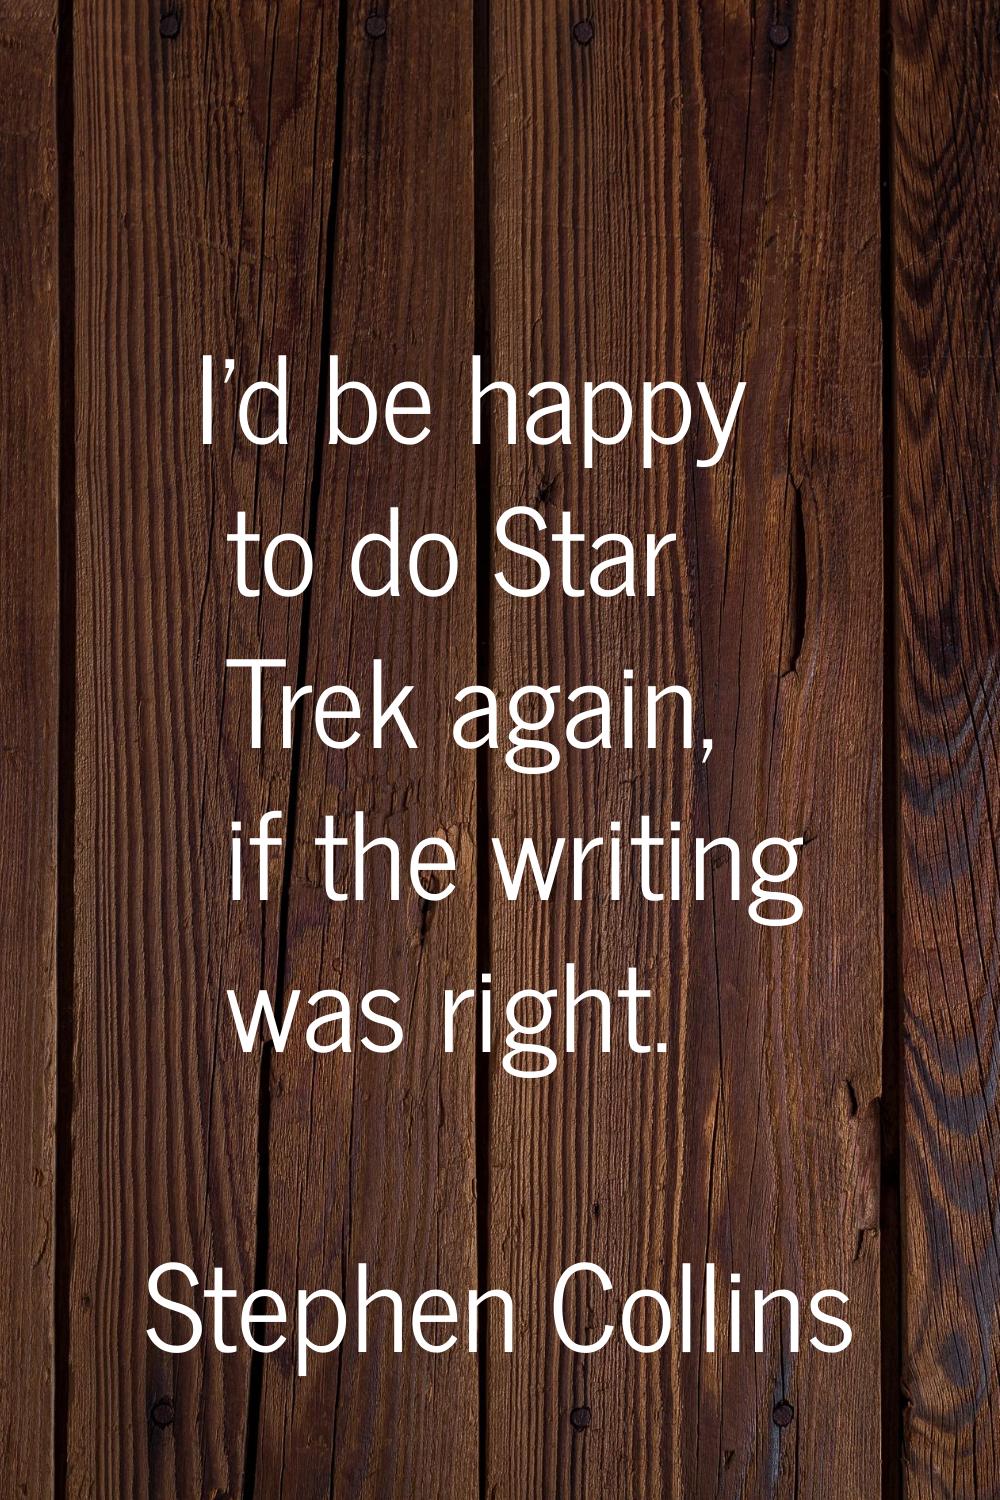 I'd be happy to do Star Trek again, if the writing was right.